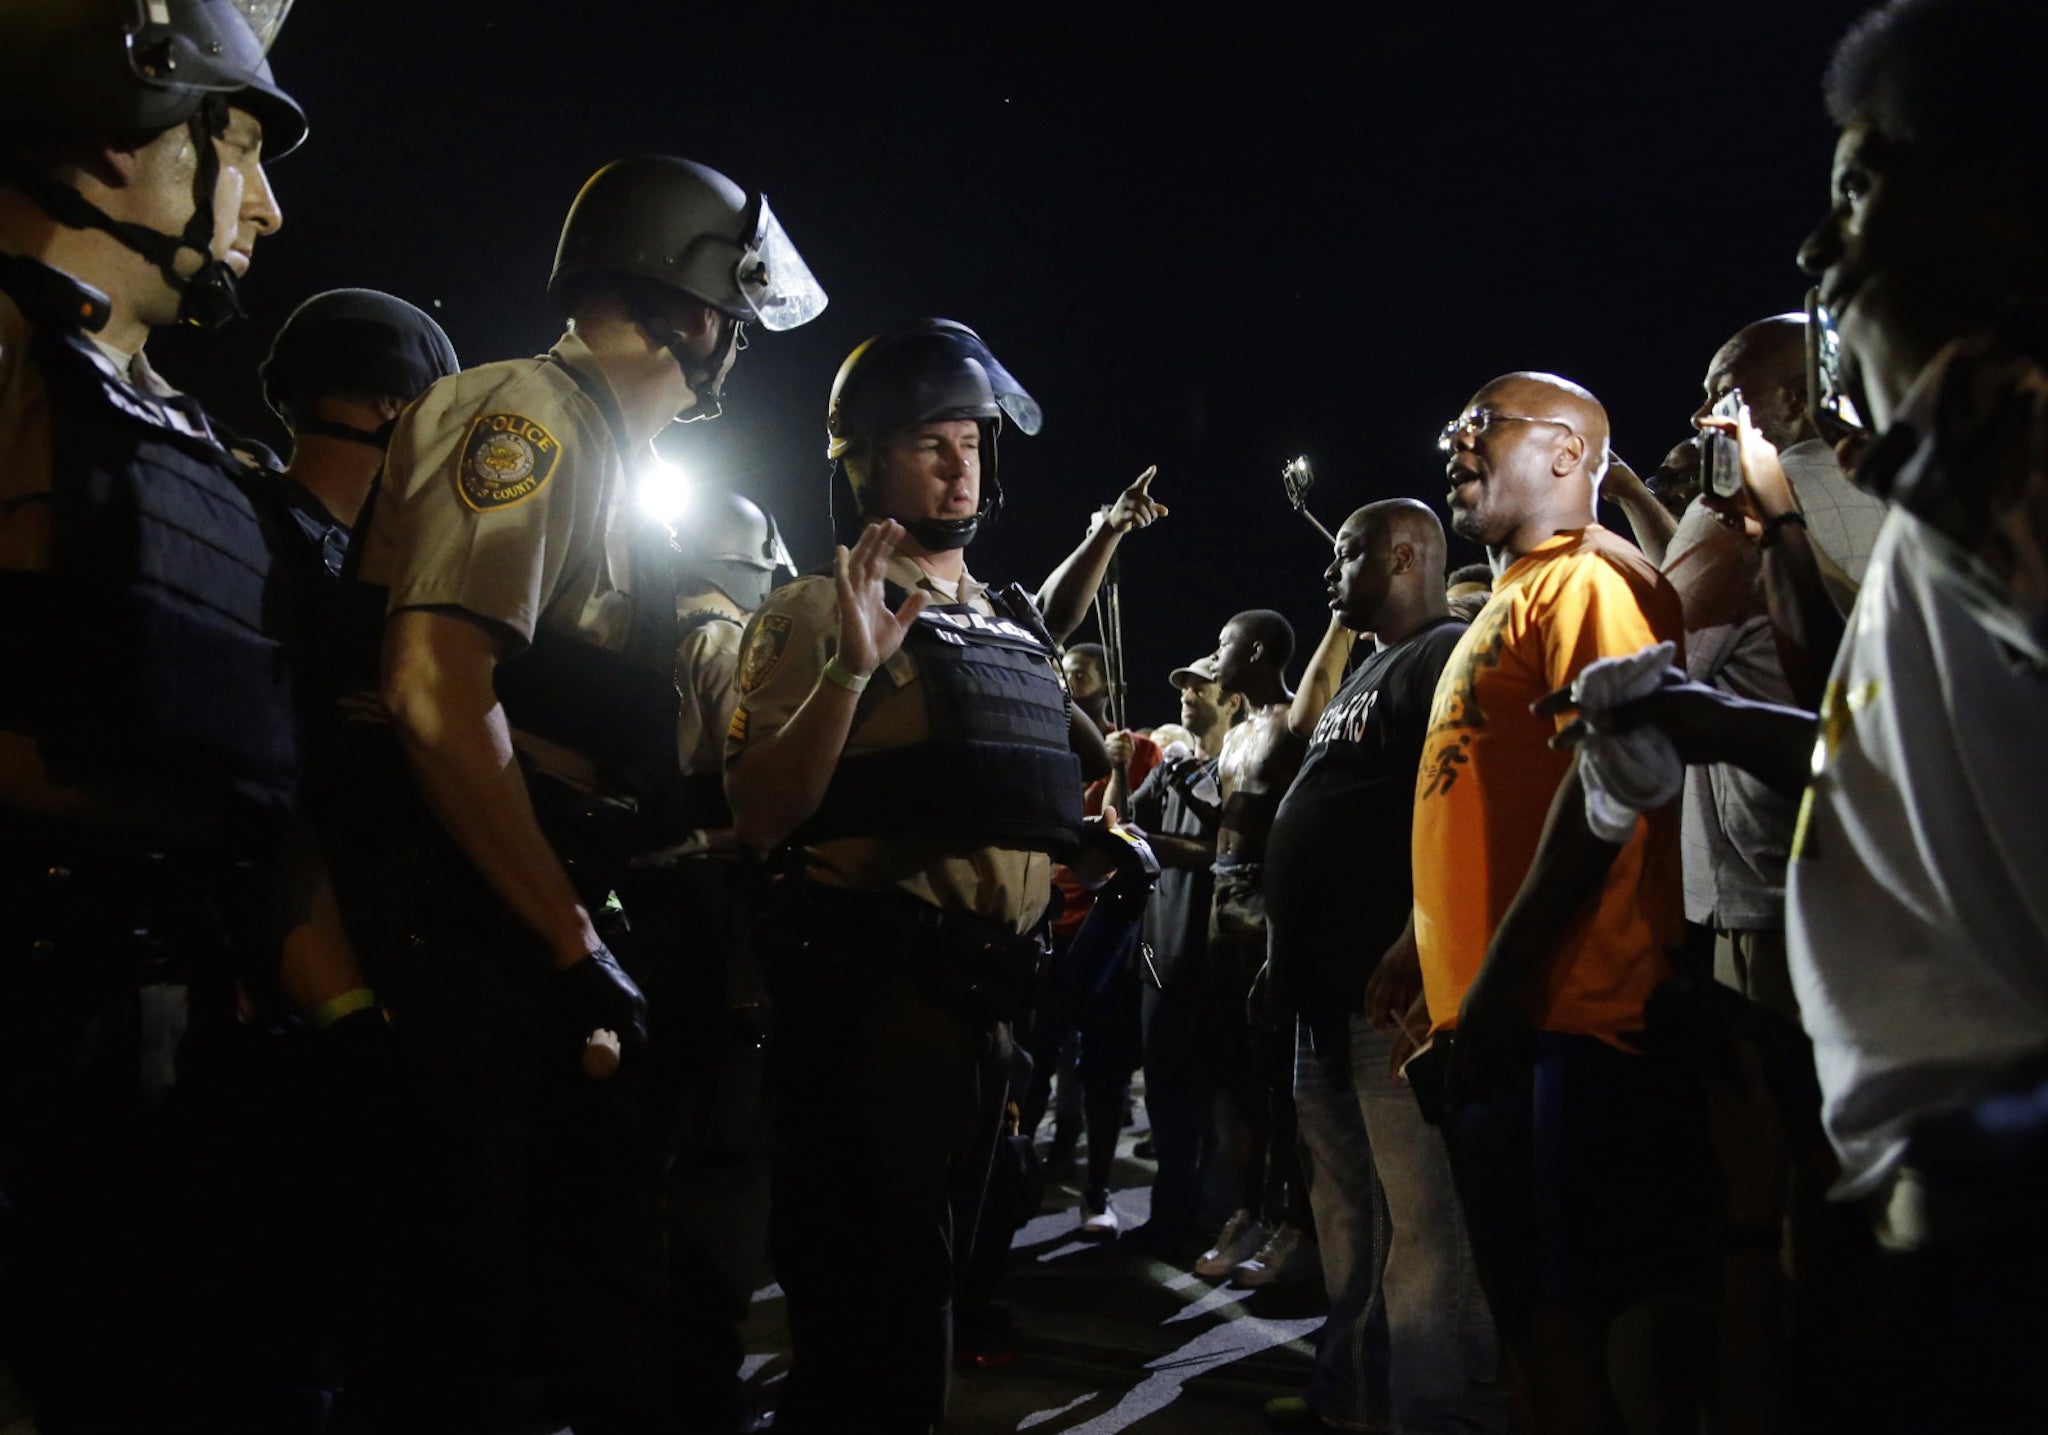 Officers and protesters face off along West Florissant Avenue on Monday.